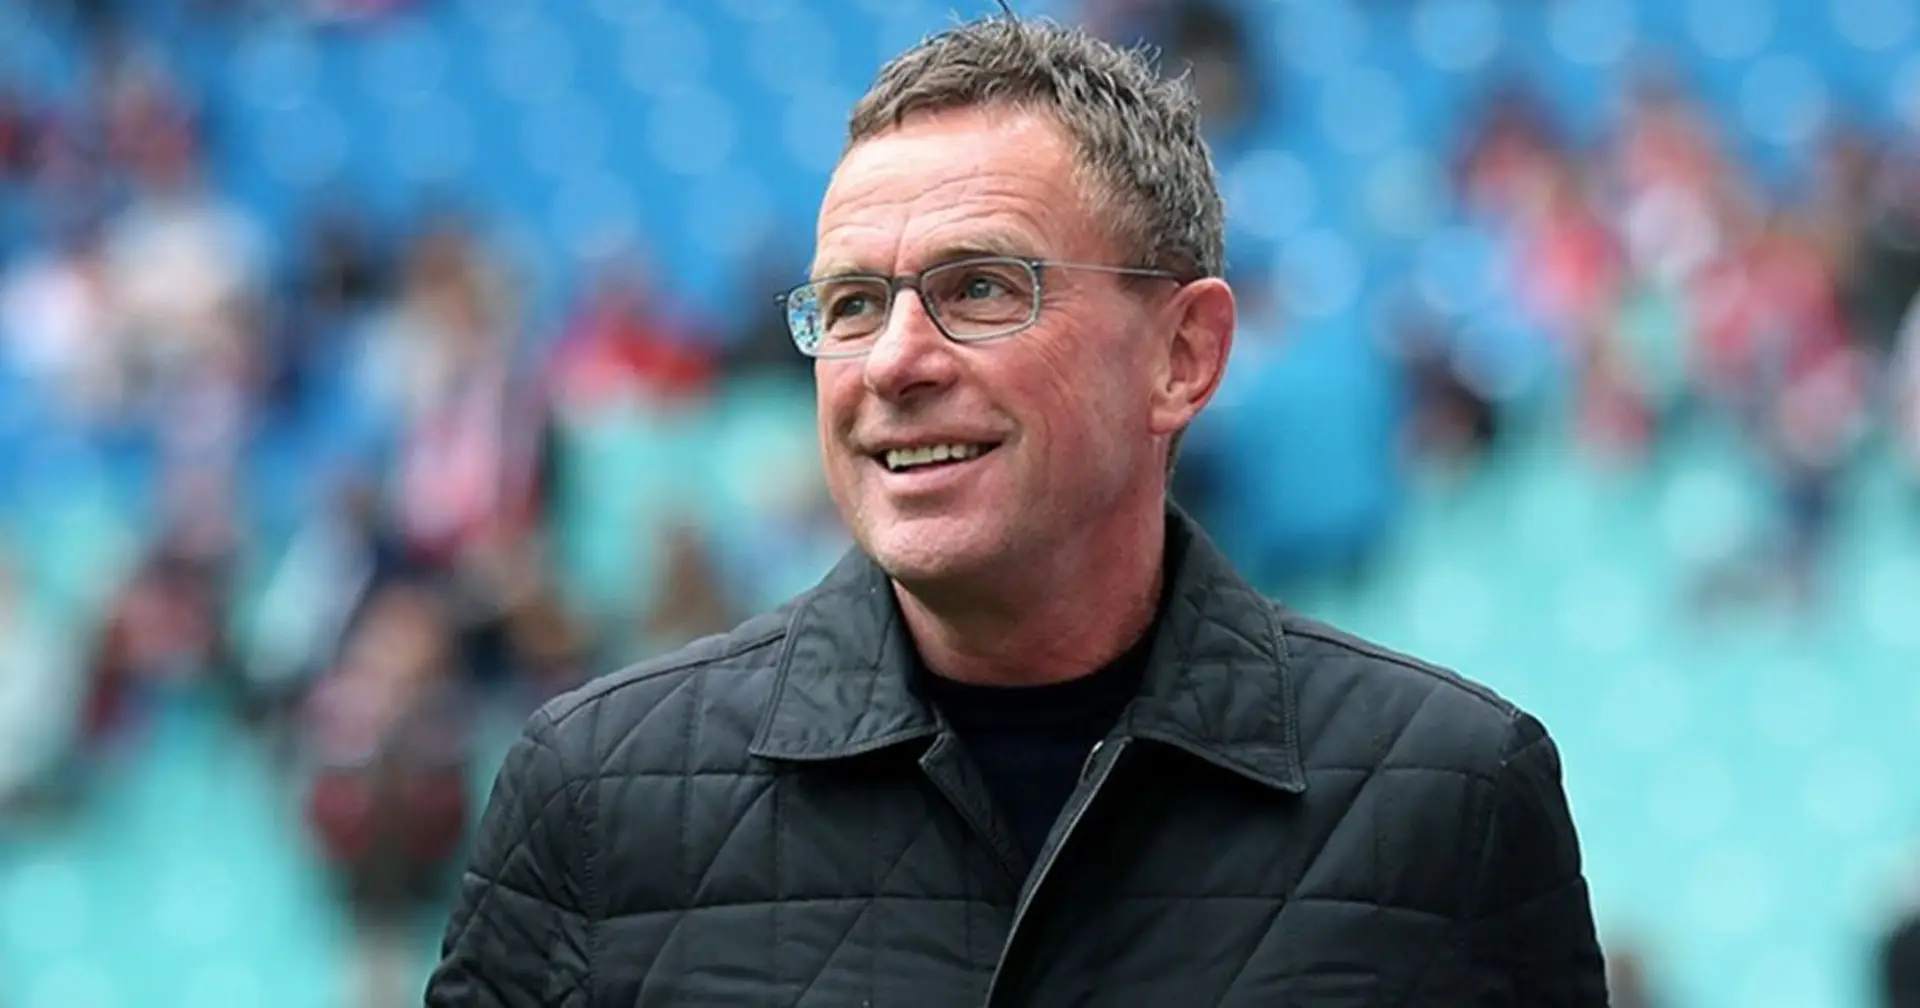 Rangnick has ‘received work visa’ and will be in dugout for Crystal Palace game